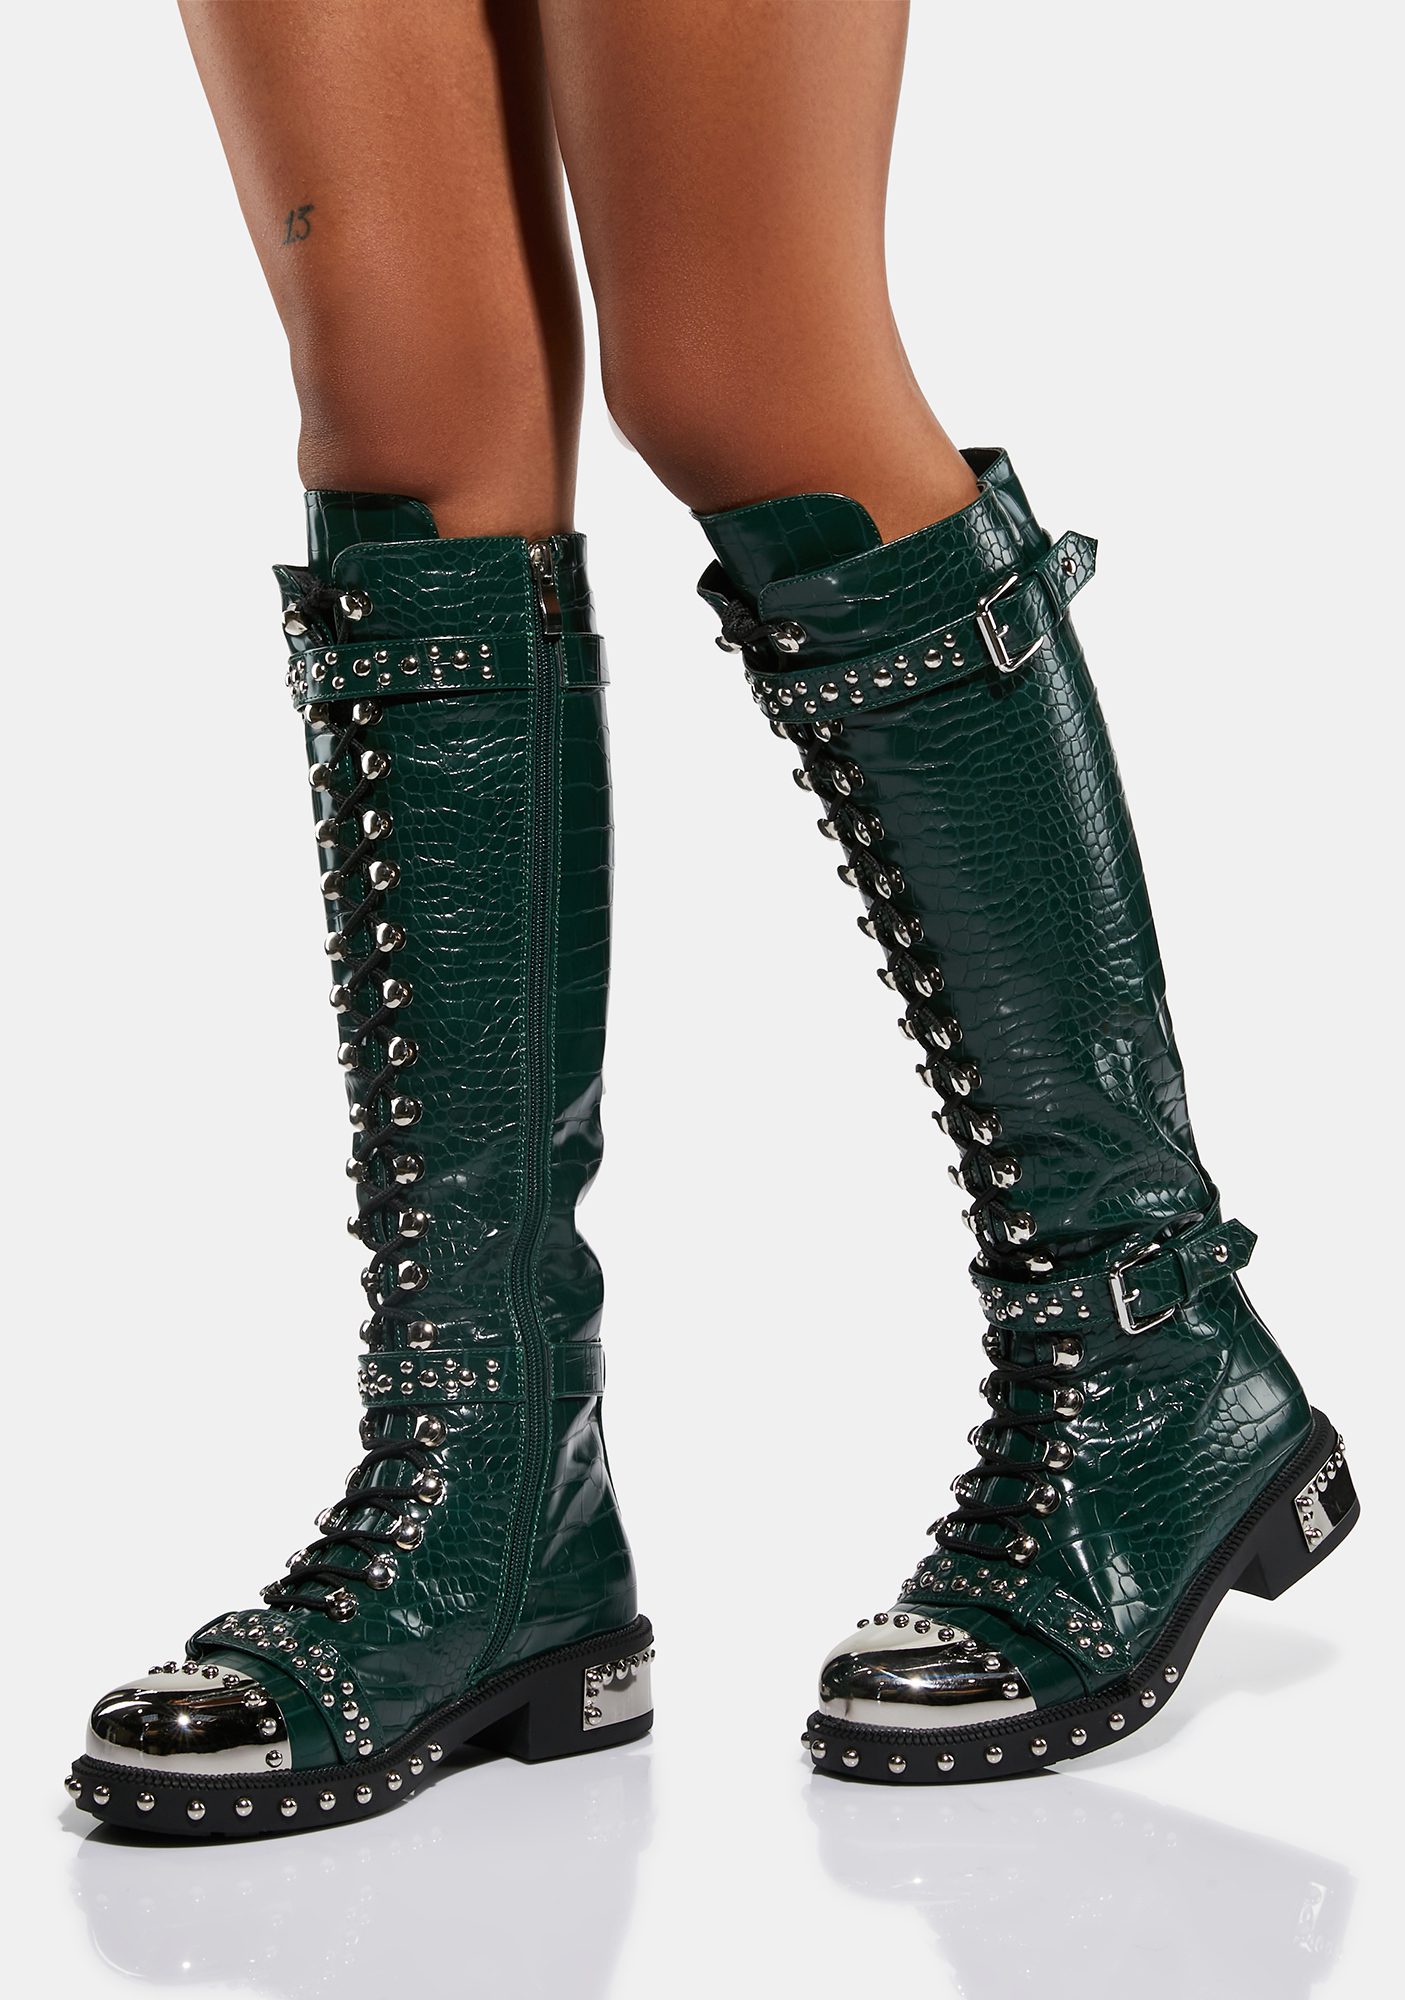 Azalea Wang Faux Leather Croc Lace Up Studded Boots - Green 